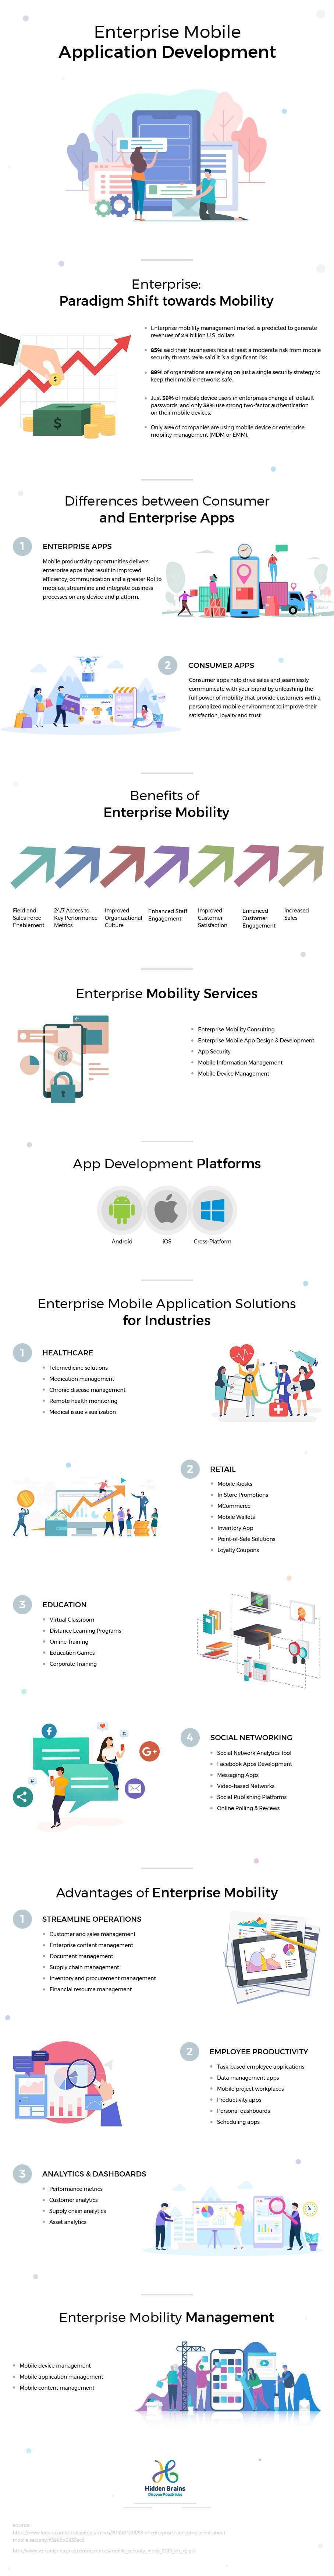 Enterprise Mobility and its Benefits